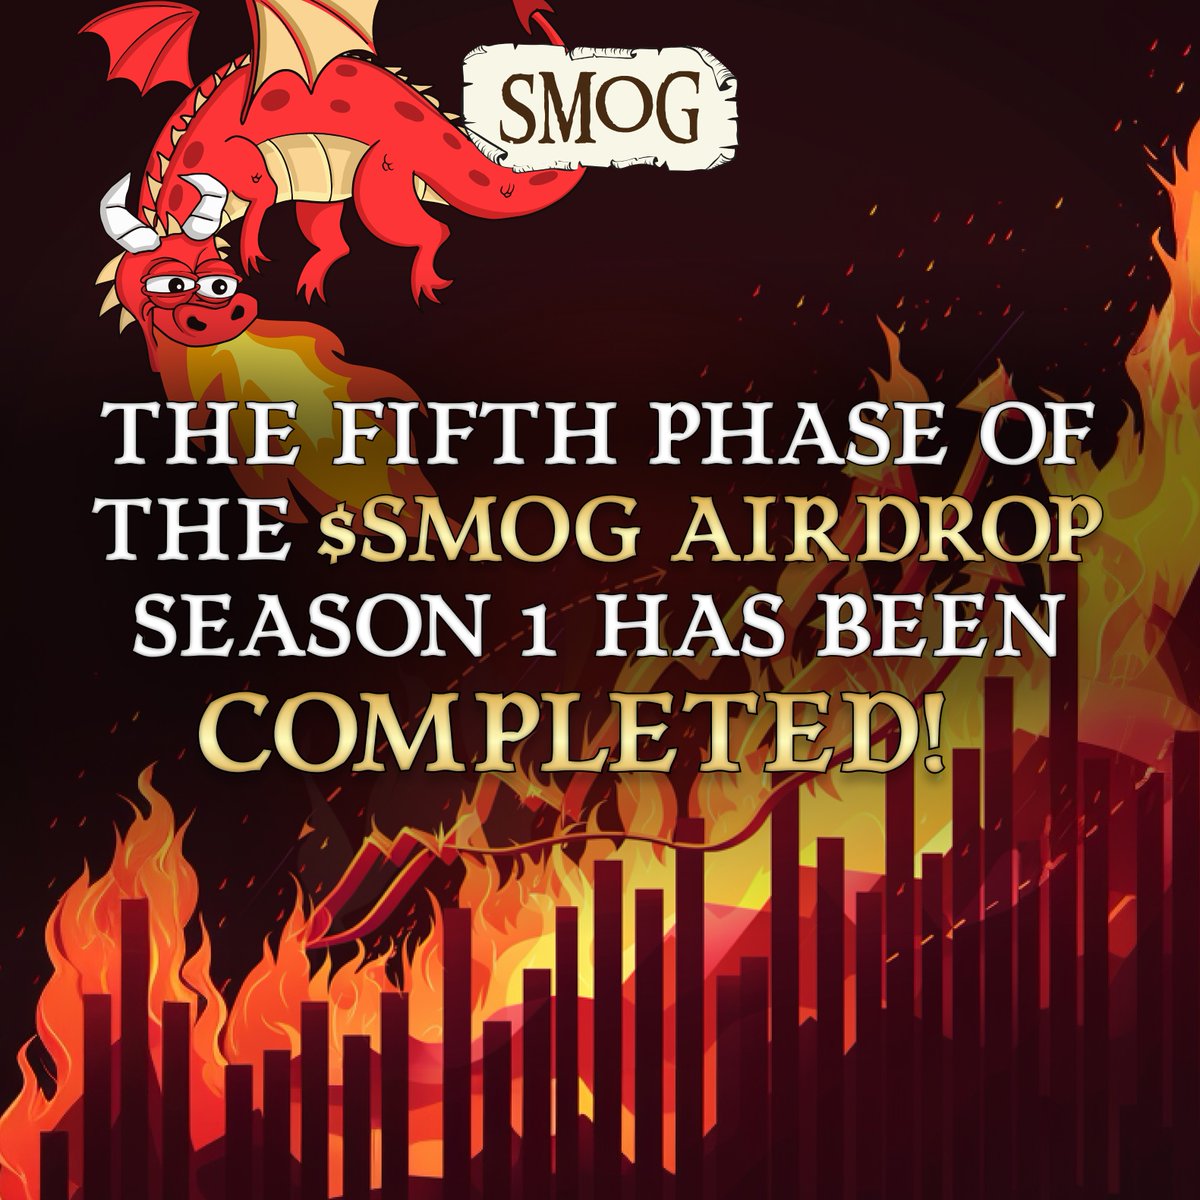 The Fifth Phase of the #SMOG #Airdrop is complete! 🎉 Climb the leaderboard by trading $SMOG and become the top #Dragon in S2! 🐉 Complete daily quests on #Zealy to earn additional points! 🎮 Stay tuned as we will be sharing some exciting news soon! 🔥 bit.ly/BuySmog